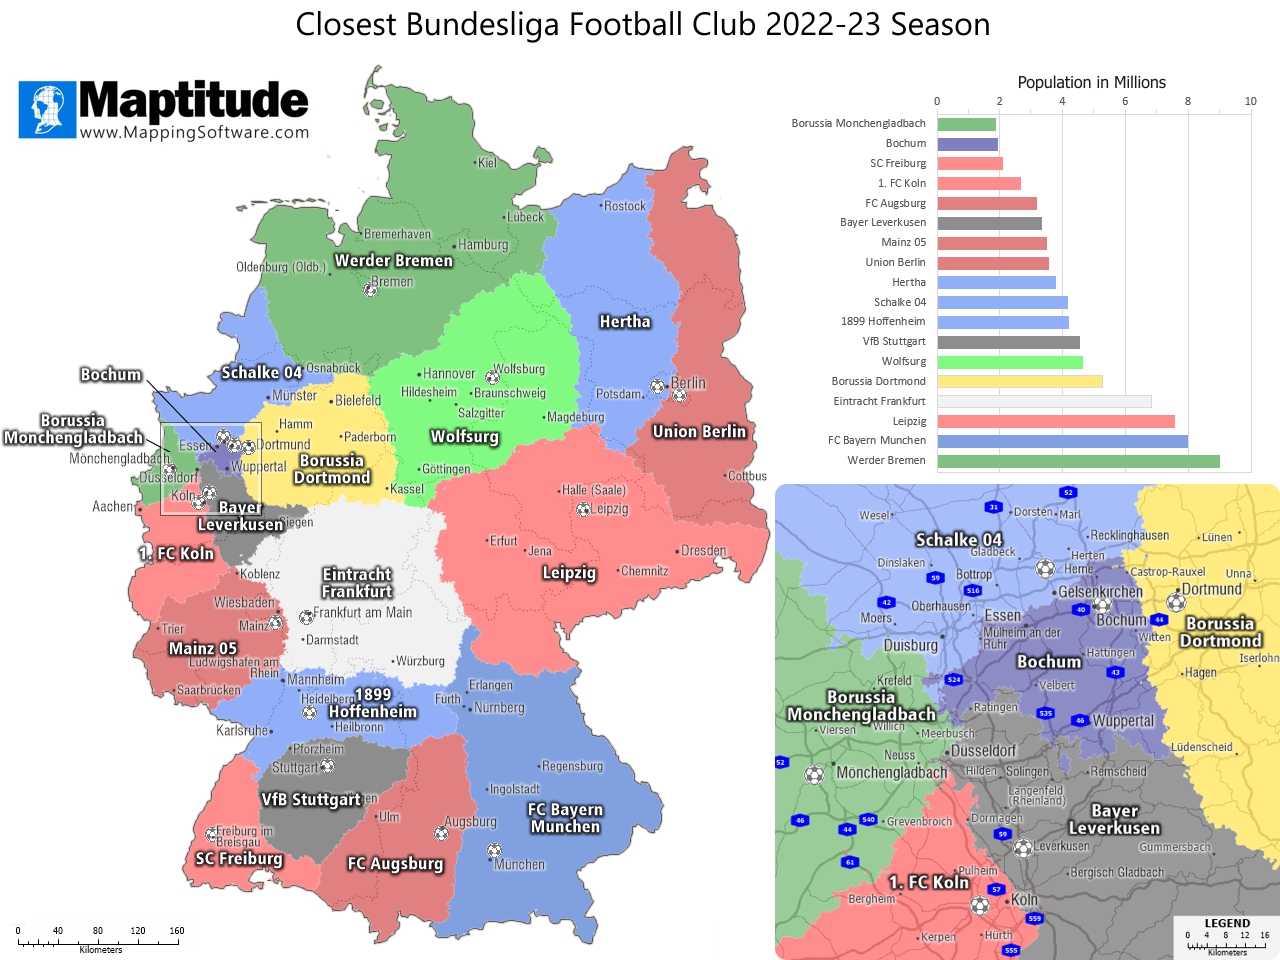 Maptitude mapping software infographic showing the Closest Bundesliga Football Club by drive time